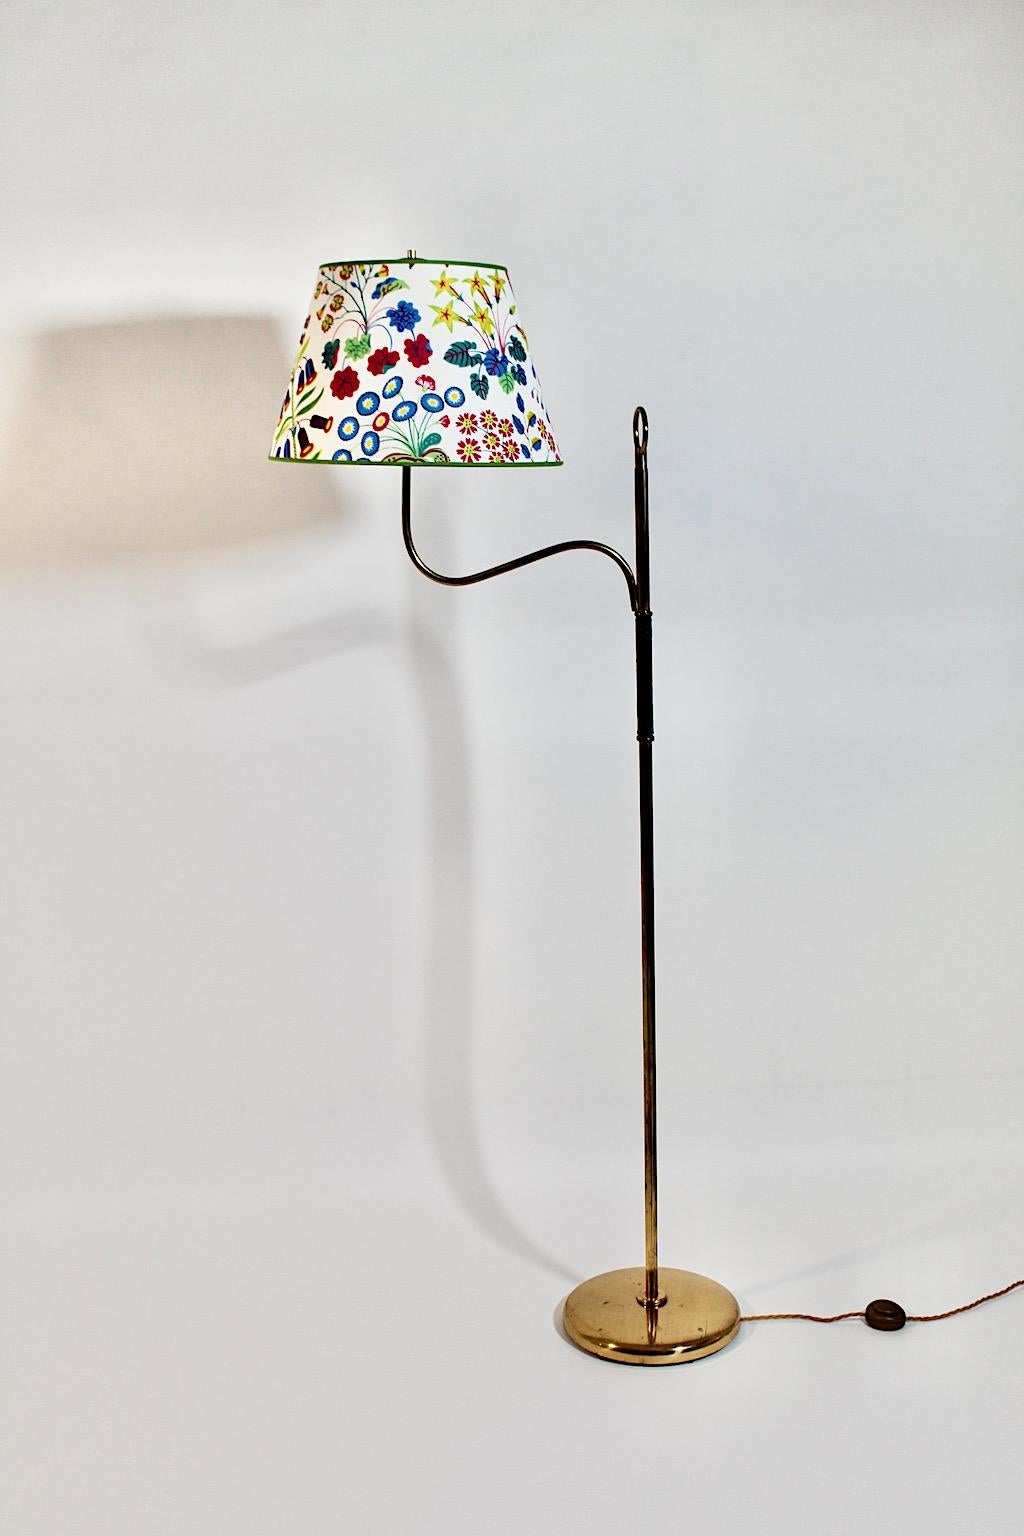 Art deco vintage floor lamp from brass and leather attributed to Josef Frank for Haus & Garten manufactured by J.T.Kalmar, circa 1935 Vienna.
An amazing floor lamp design attributed to Josef Frank manufactured by J.T. Kalmar for Haus & Garten circa